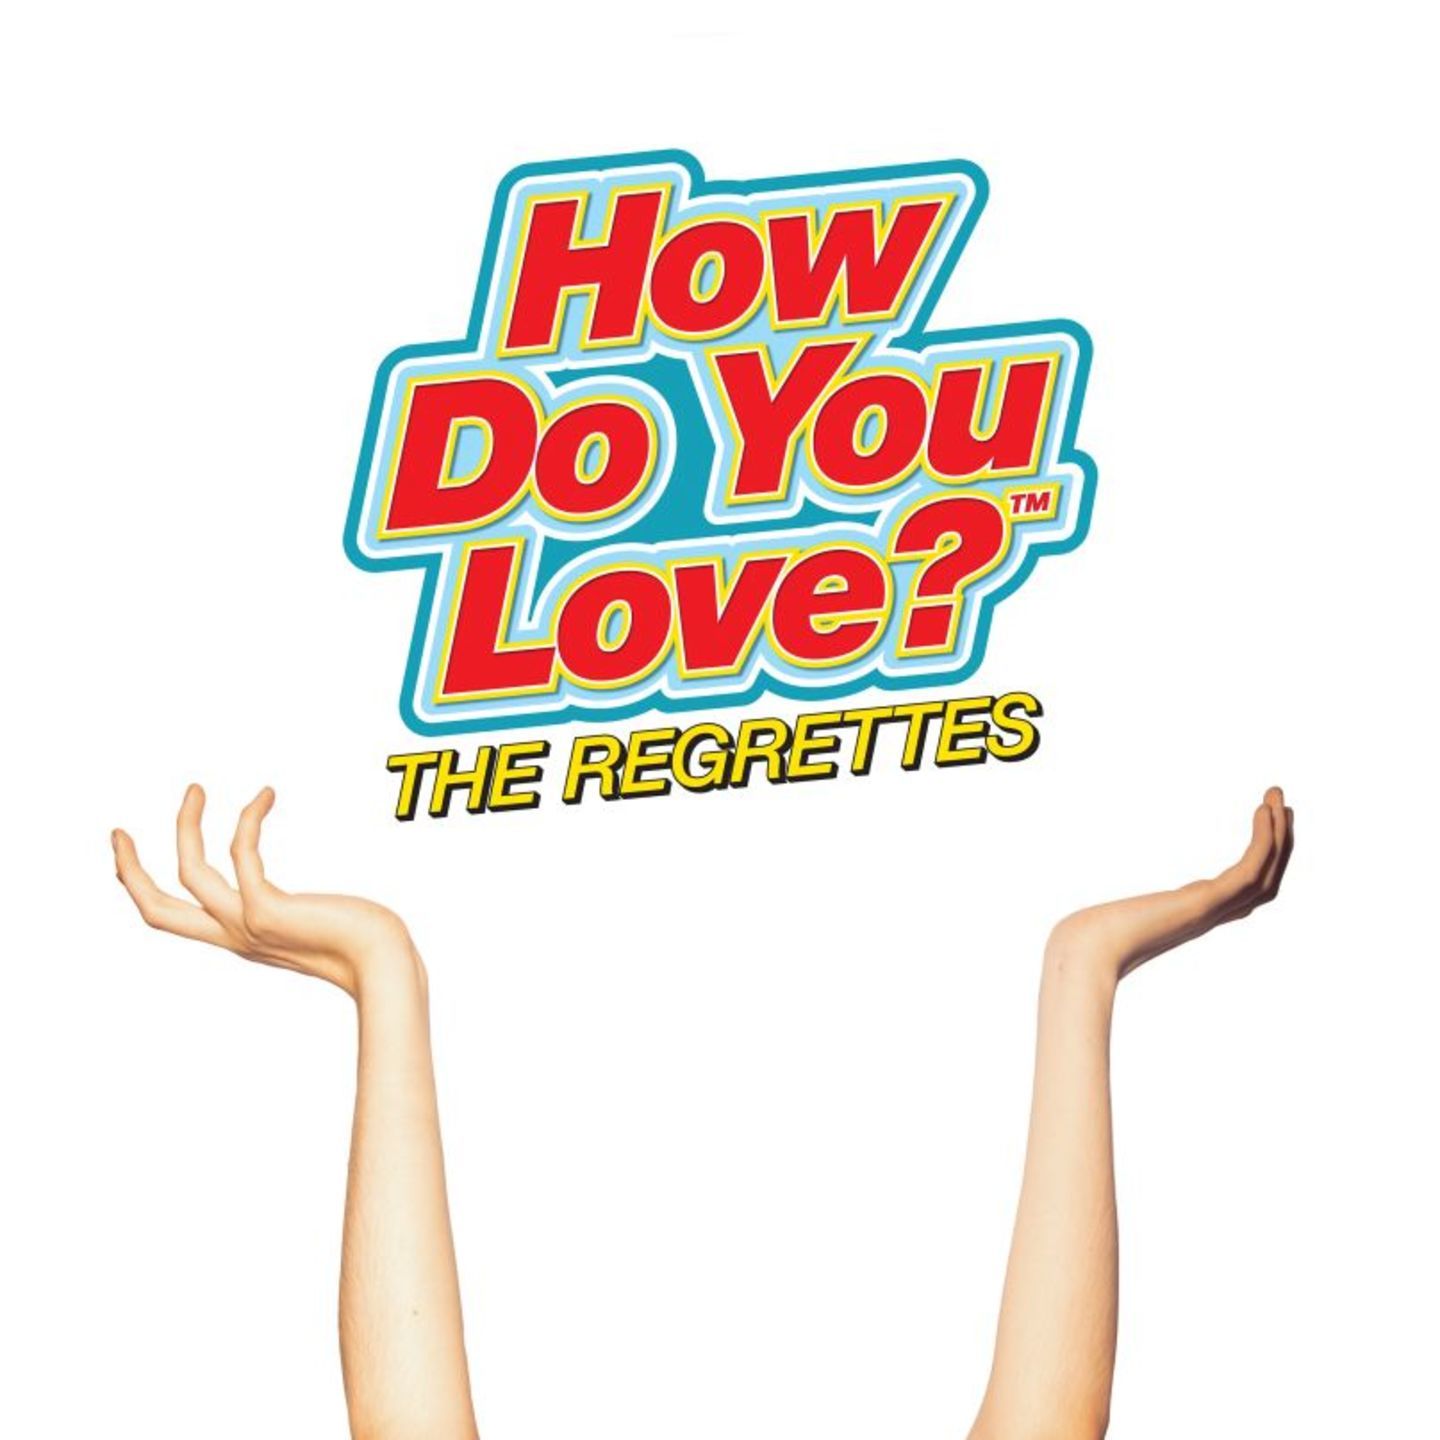 REGRETTES, THE - How Do You Love LP